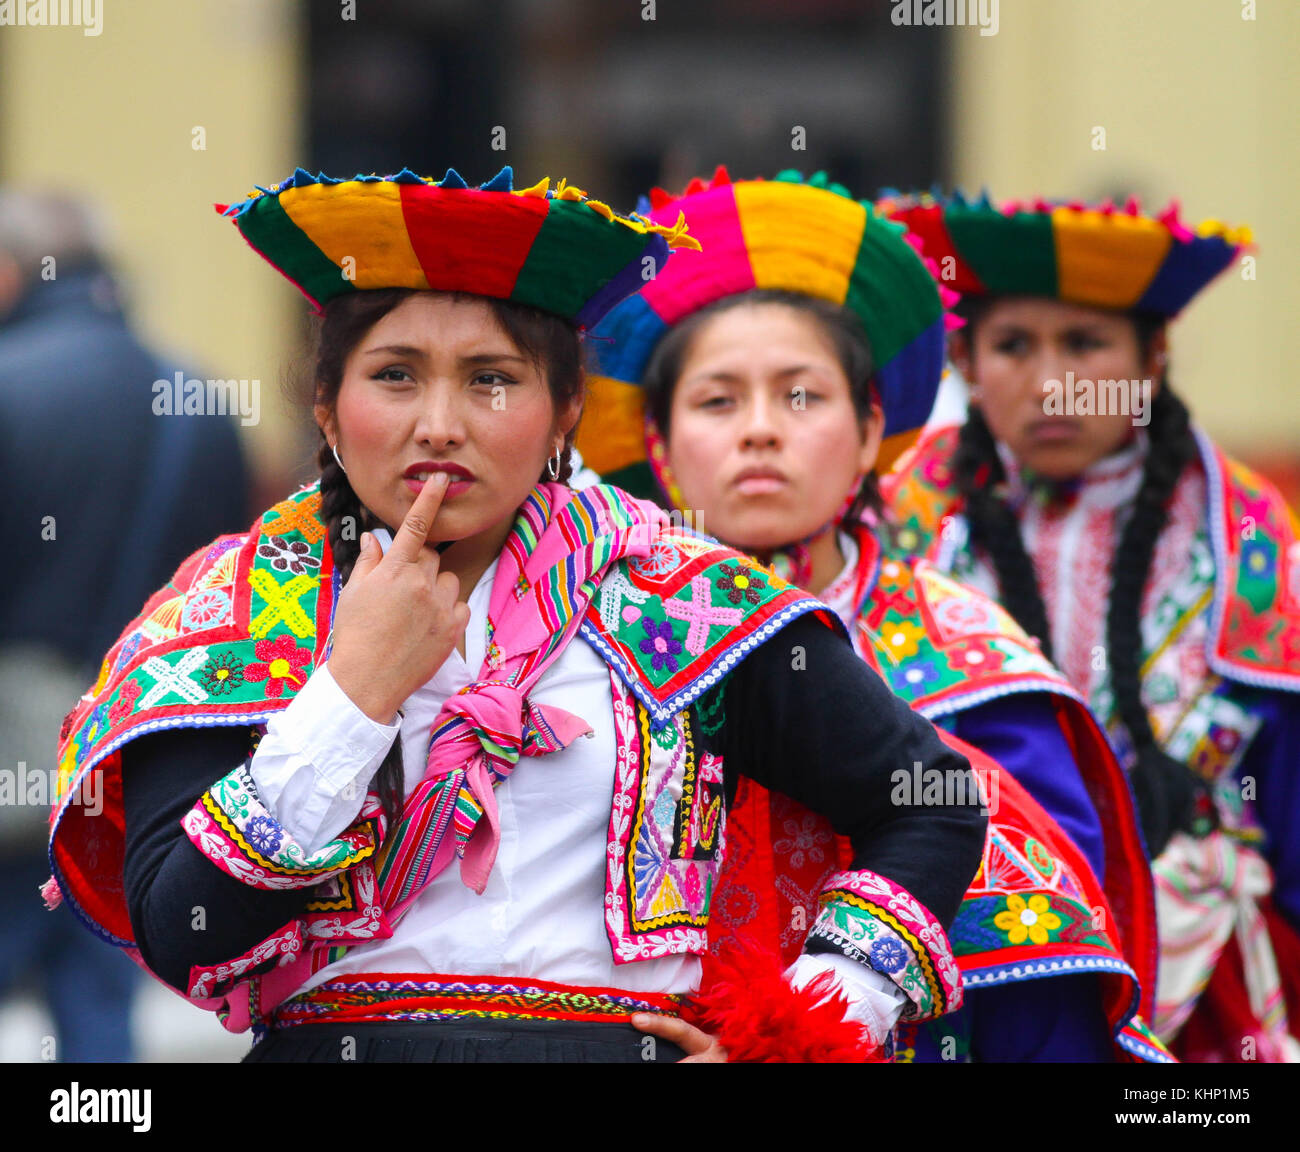 Women in costume at a street carnival in Lima, Peru Stock Photo